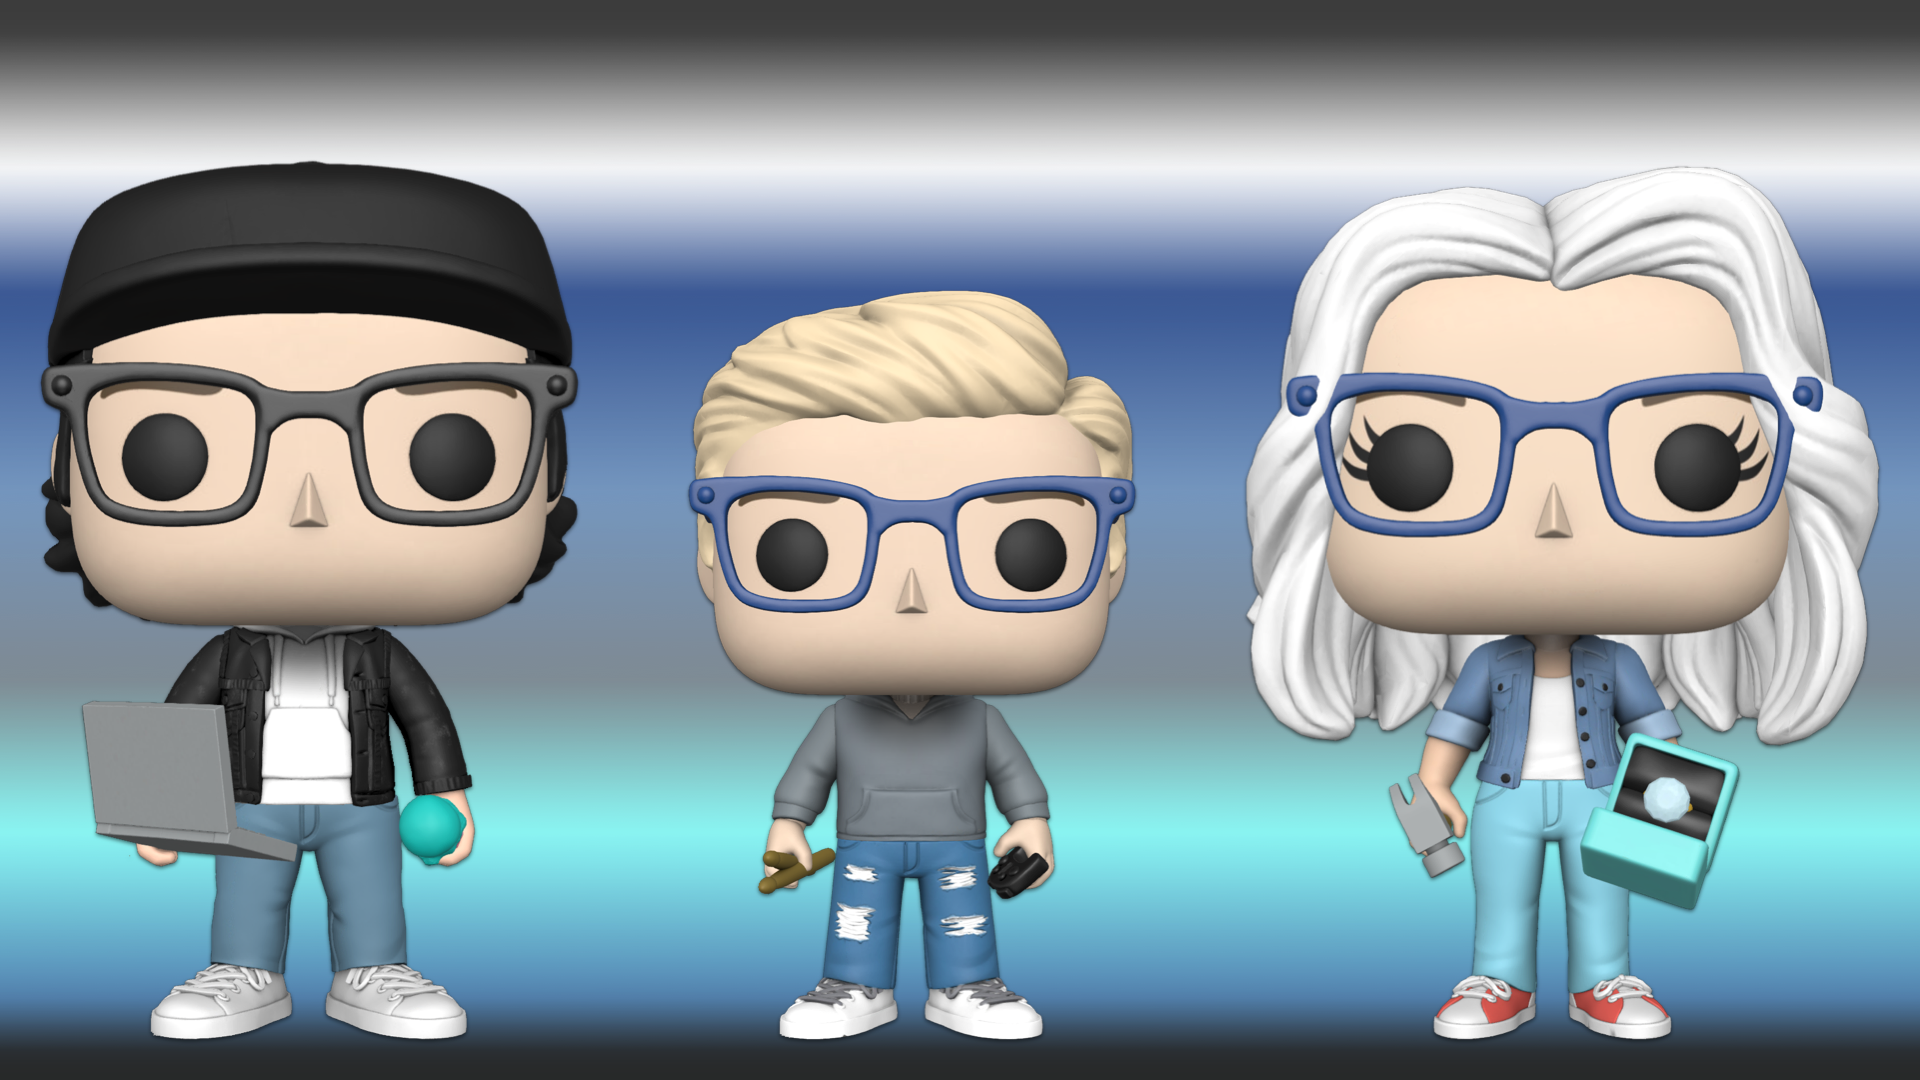 Images of 3 Funko figures: Man, Boy, Woman.